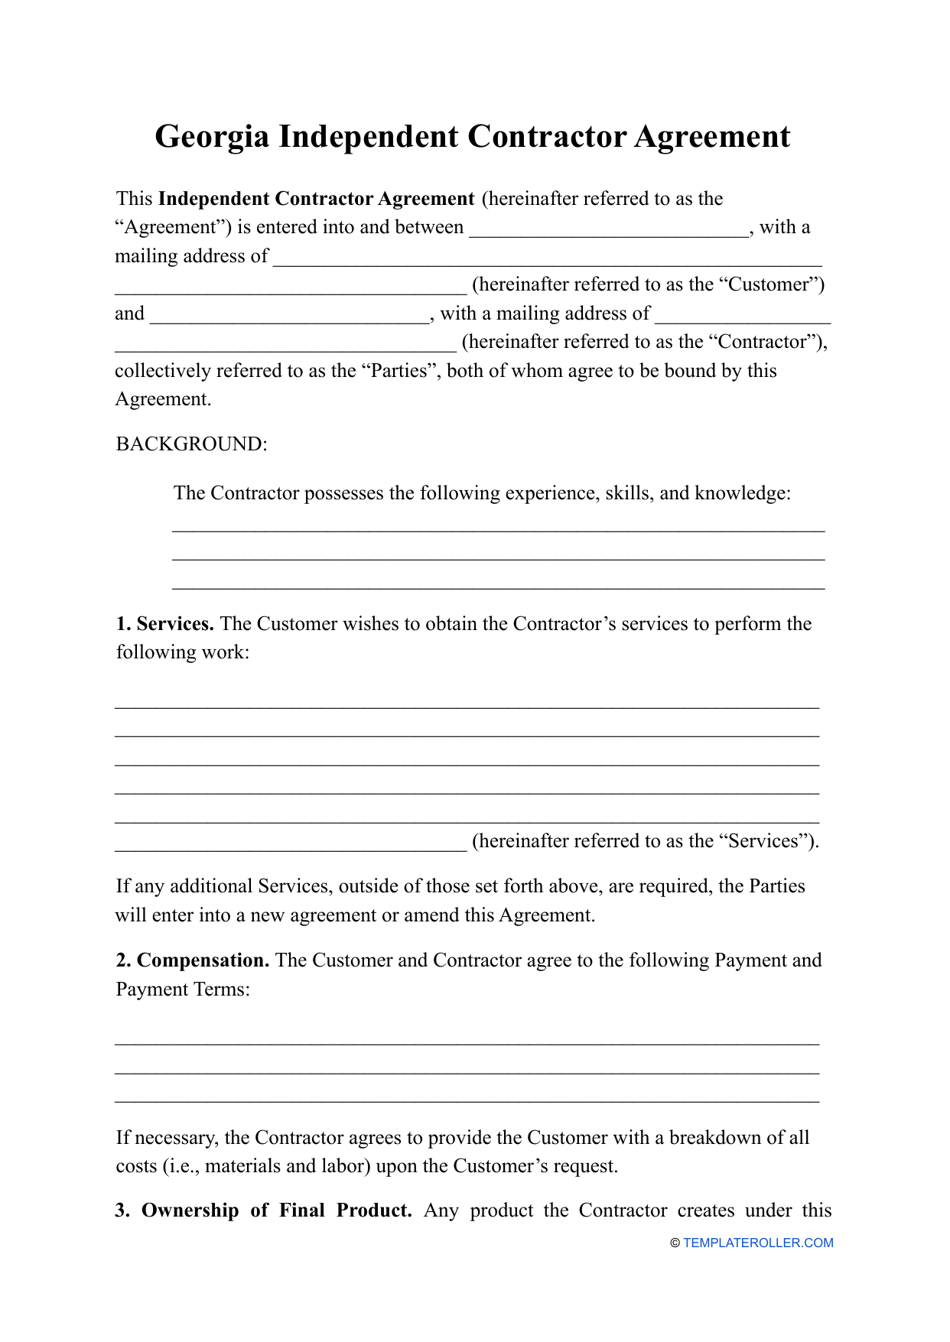 Independent Contractor Agreement Template - Georgia (United States), Page 1